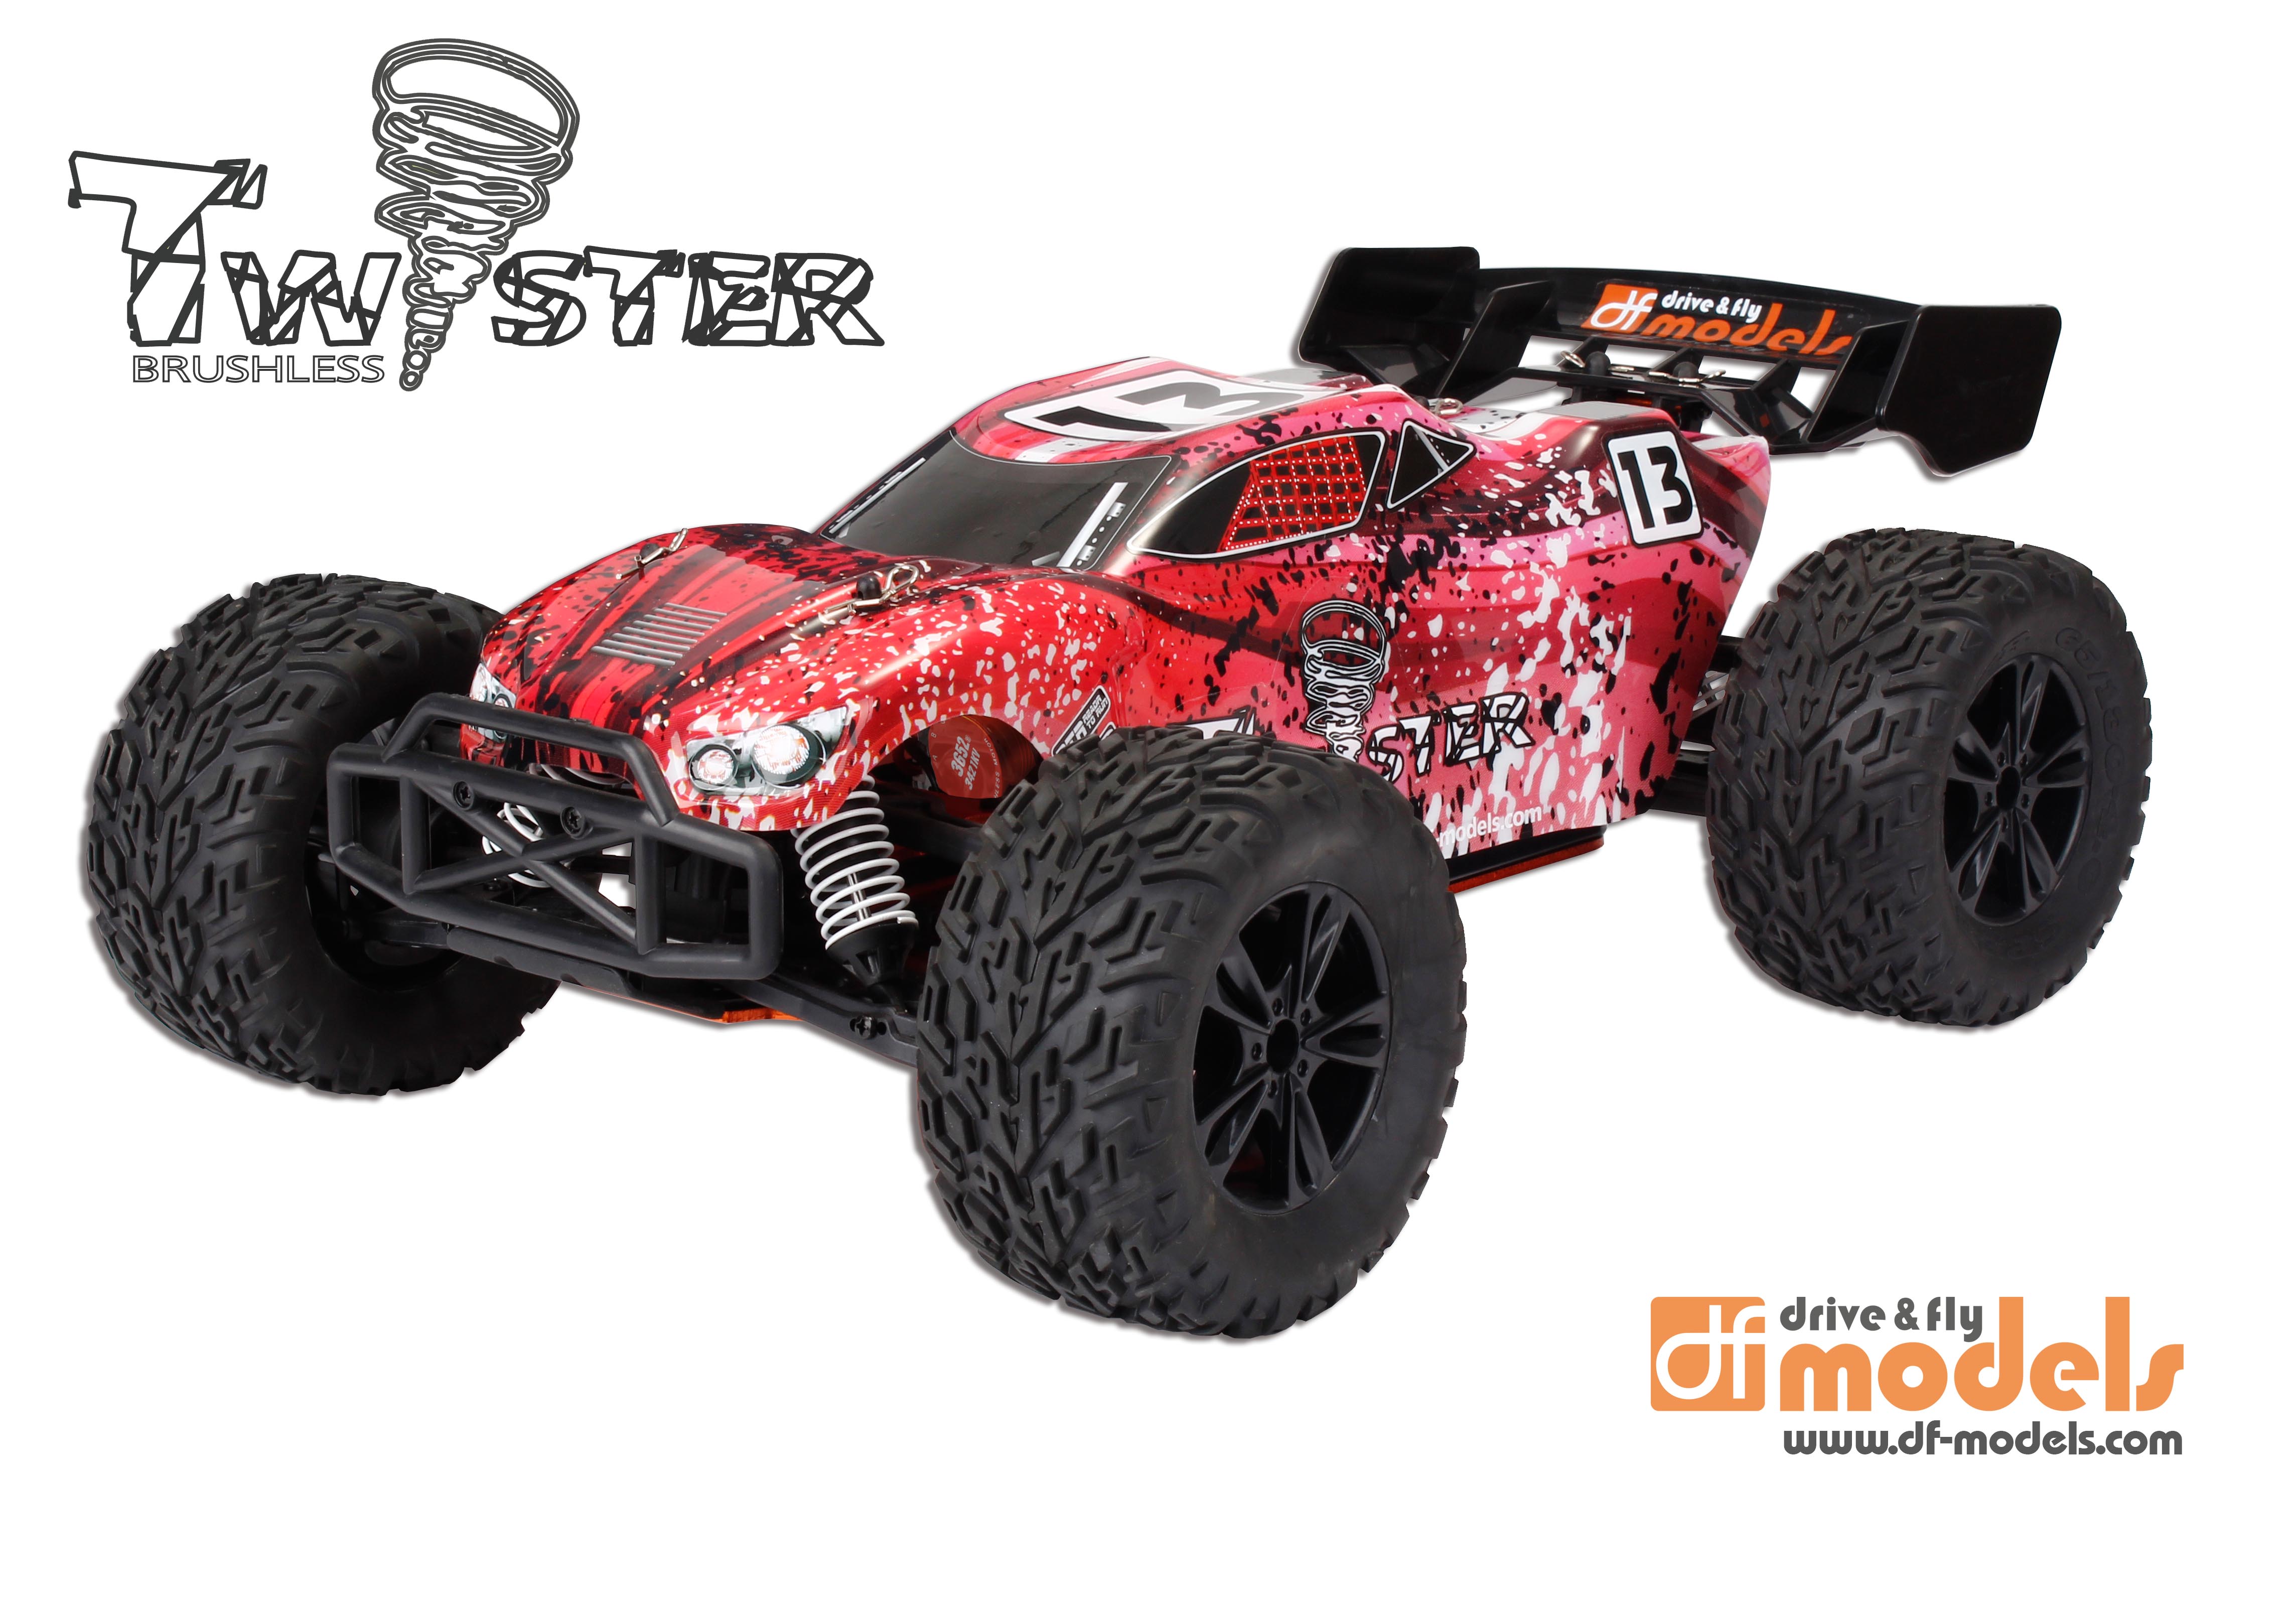 TWISTER Truggy 1:10XL RTR Brushless